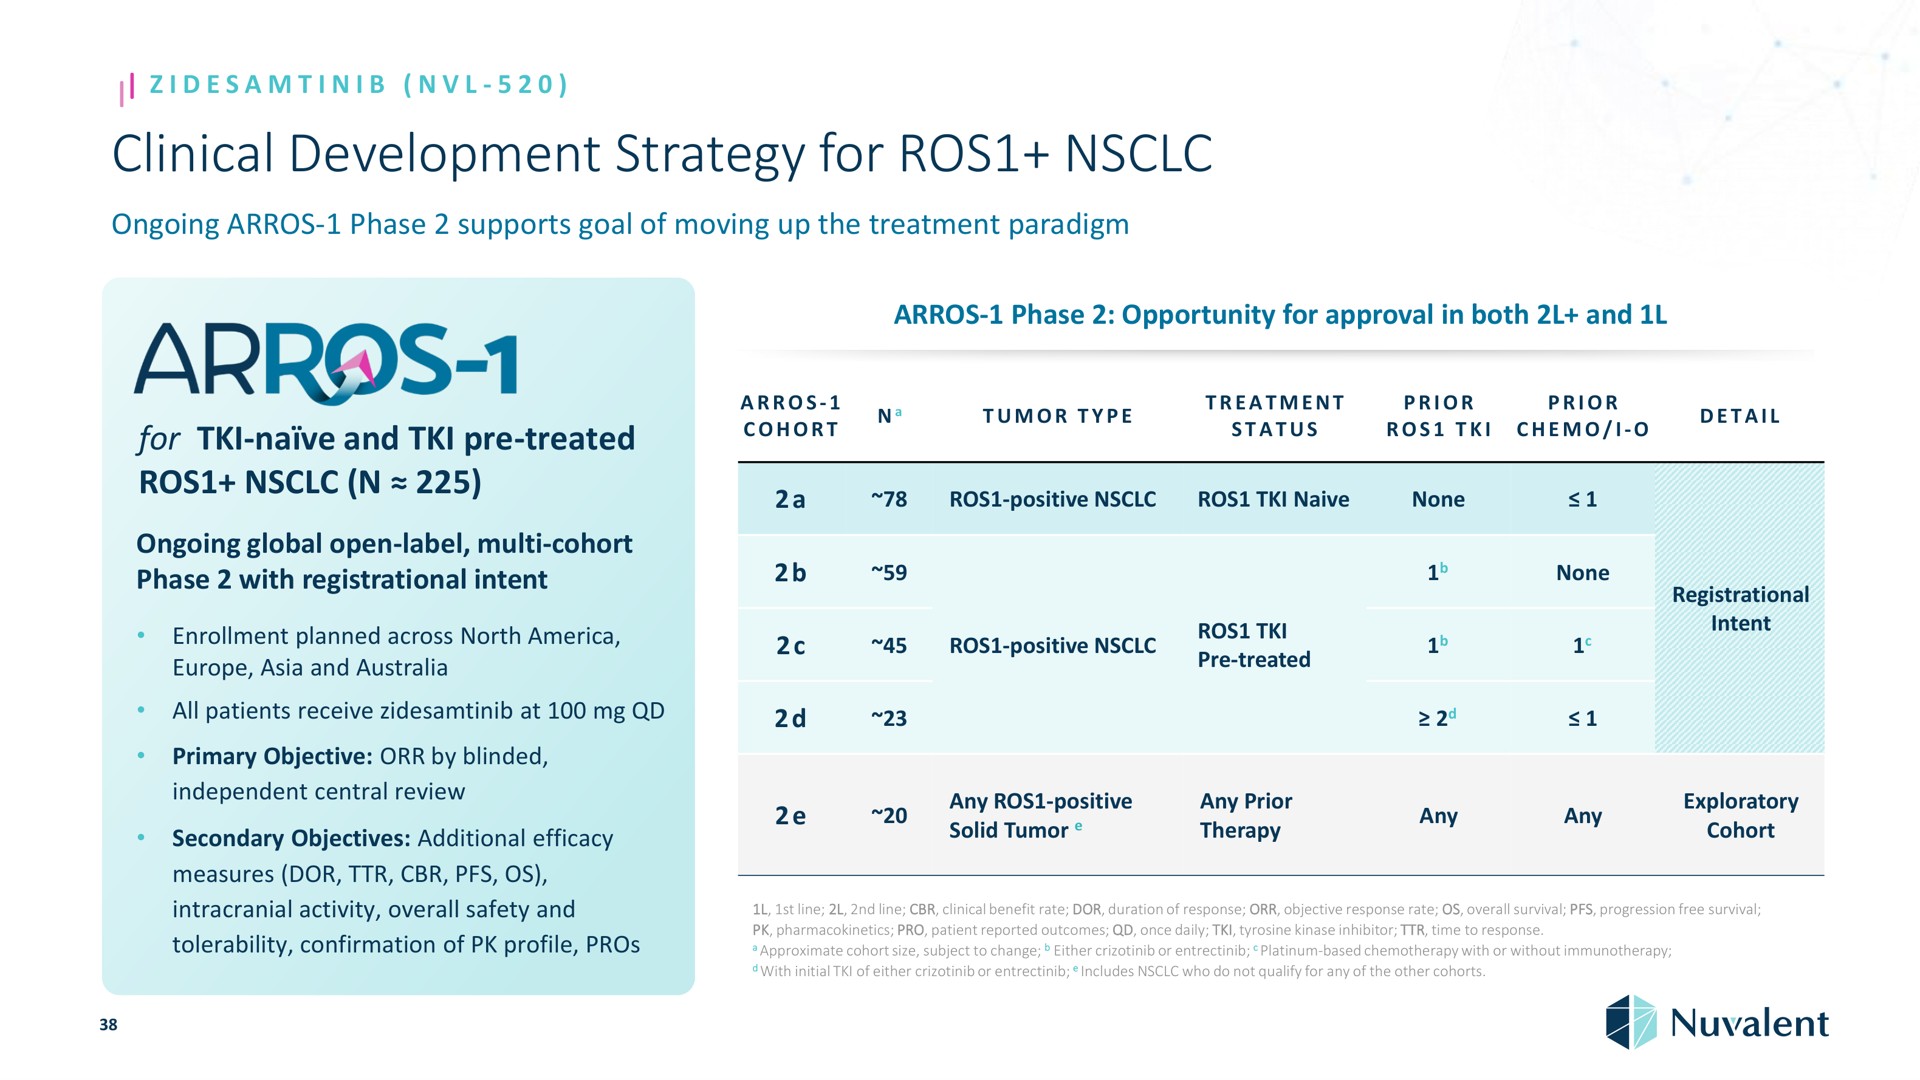 clinical development strategy for cion ongoing phase supports goal of moving up the treatment paradigm naive and treated ongoing global open label cohort phase with registrational intent enrollment planned across north and all patients receive at primary objective by blinded independent central review secondary objectives additional efficacy measures dor intracranial activity overall safety and tolerability confirmation of profile pros phase opportunity approval in both and cohort tumor status i bepale treatment prior prior a positive naive none a positive any positive solid tumor any prior therapy a a none a registrational intent exploratory cohort progression free | Nuvalent